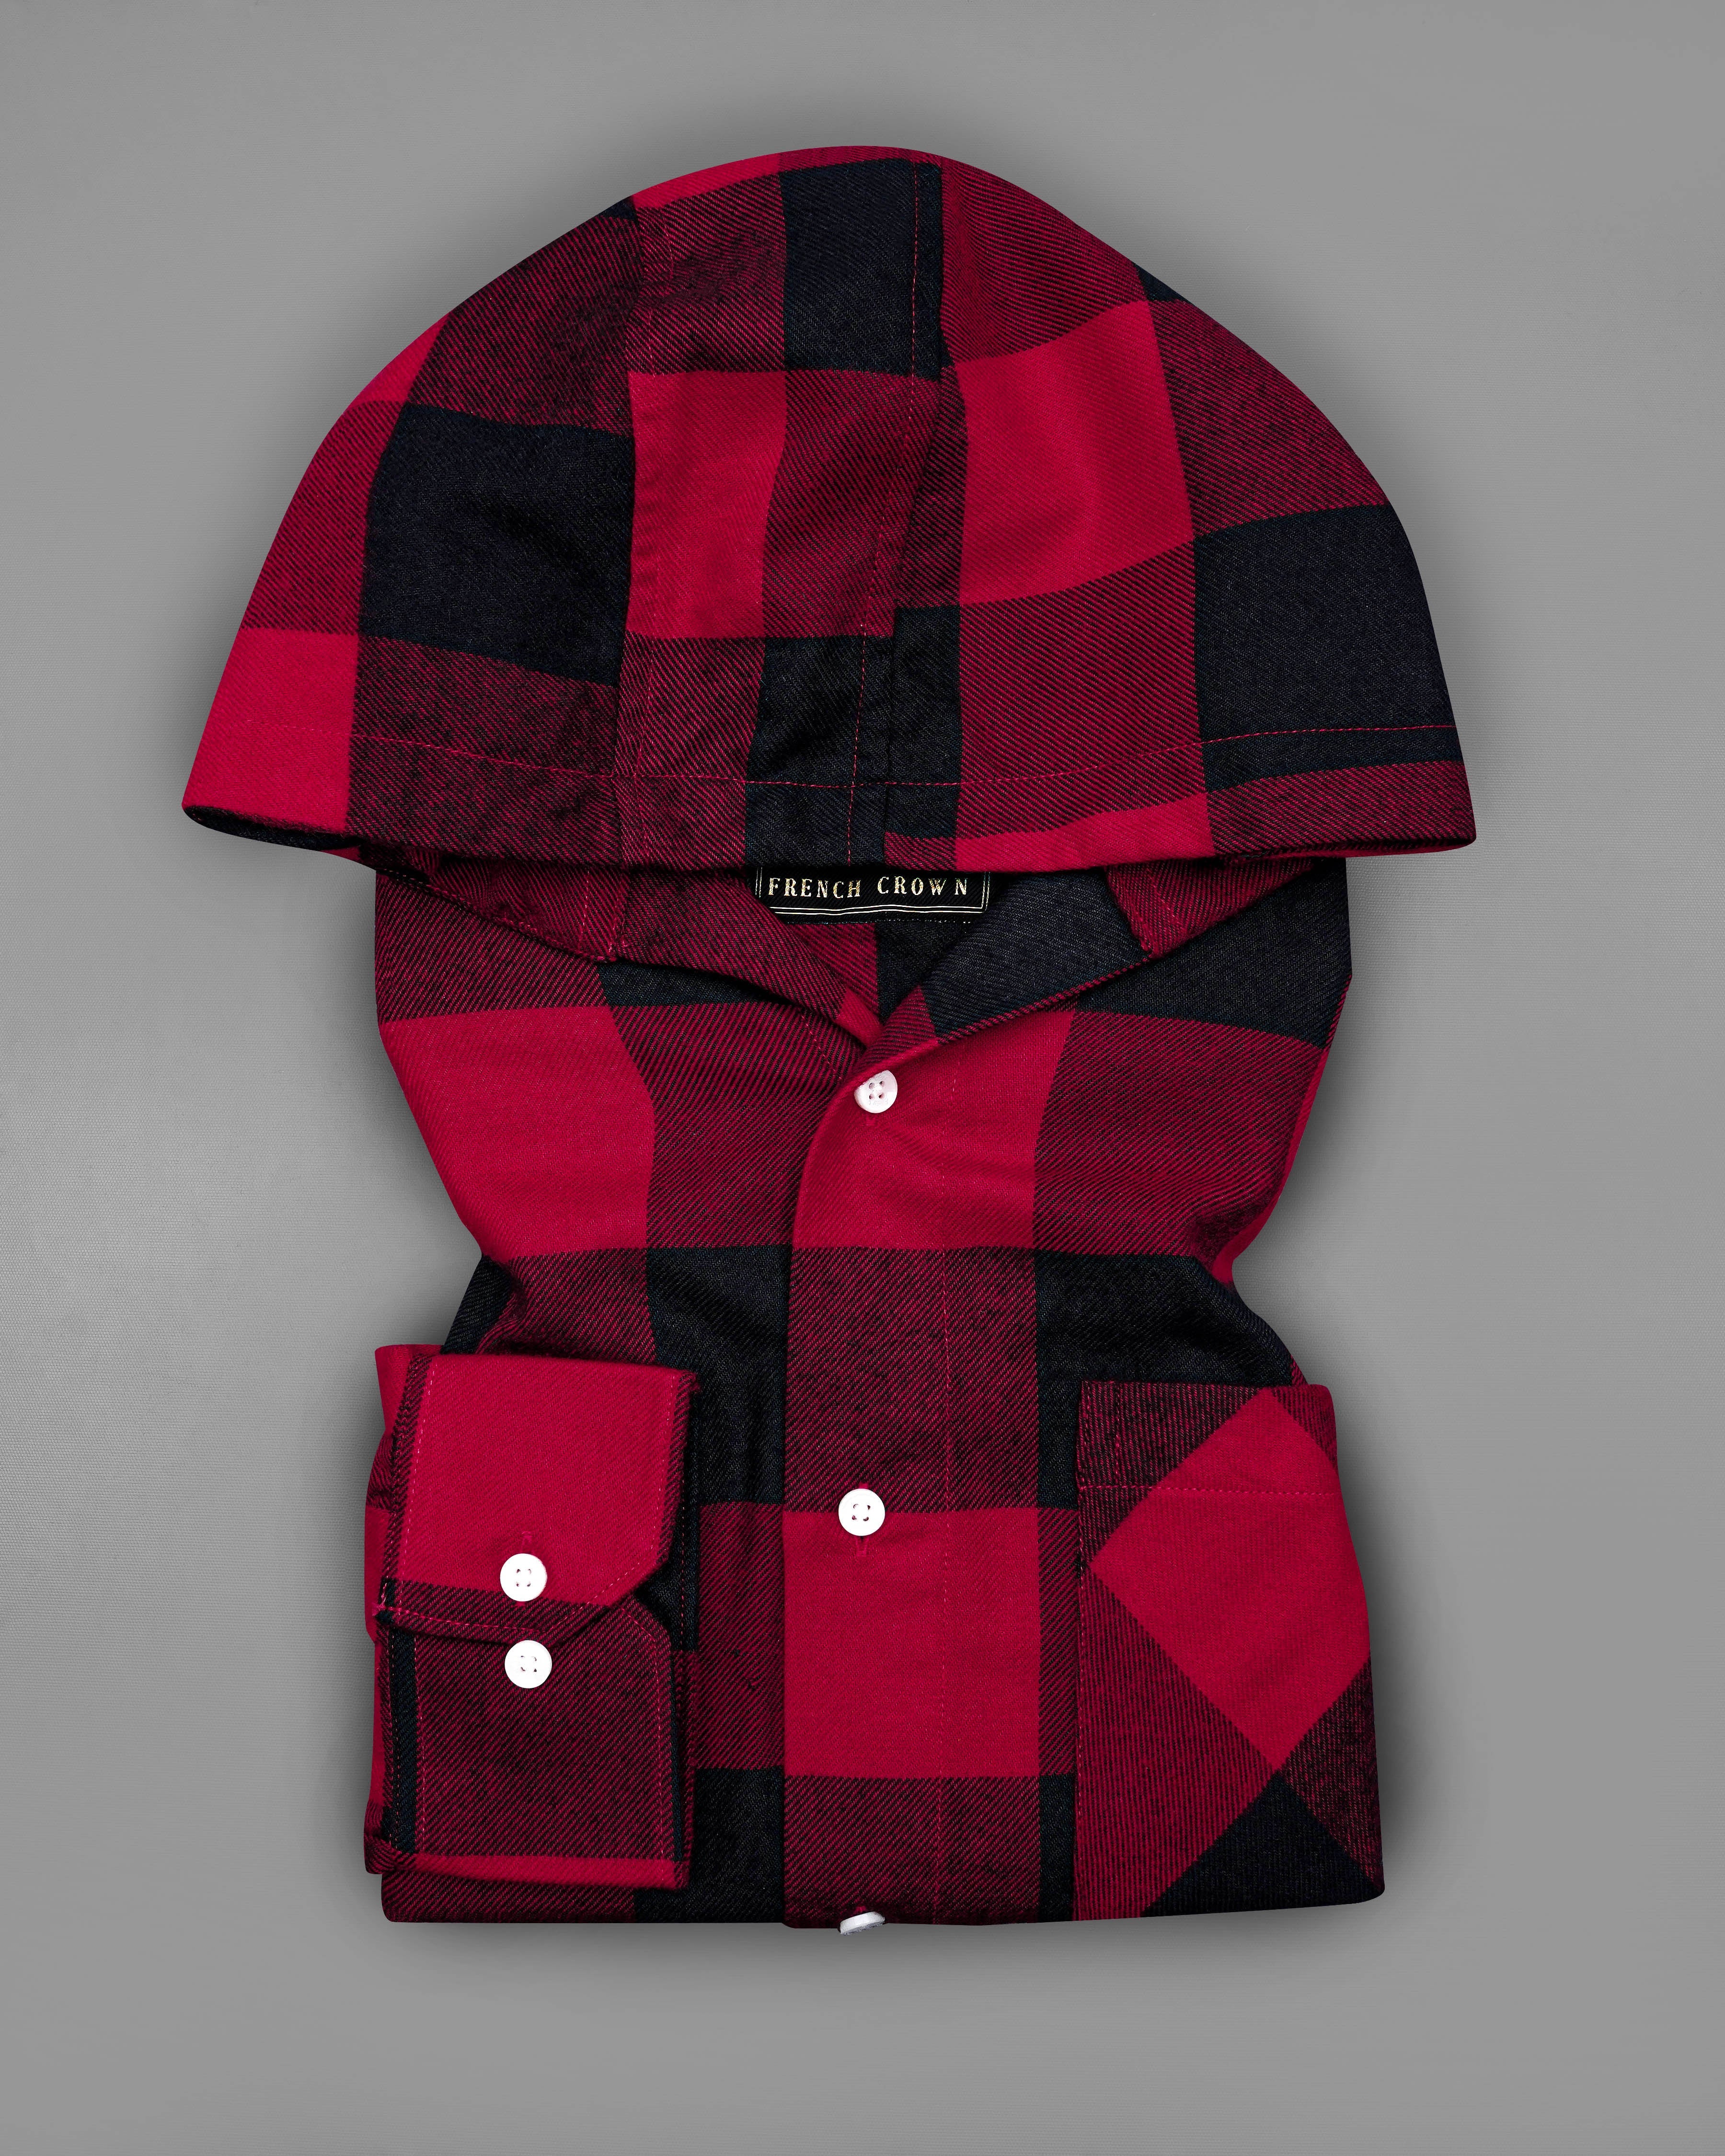 Monarch Red and Black Checked Flannel Hoodie Overshirt 8343-HD-38, 8343-HD-H-38, 8343-HD-39, 8343-HD-H-39, 8343-HD-40, 8343-HD-H-40, 8343-HD-42, 8343-HD-H-42, 8343-HD-44, 8343-HD-H-44, 8343-HD-46, 8343-HD-H-46, 8343-HD-48, 8343-HD-H-48, 8343-HD-50, 8343-HD-H-50, 8343-HD-52, 8343-HD-H-52